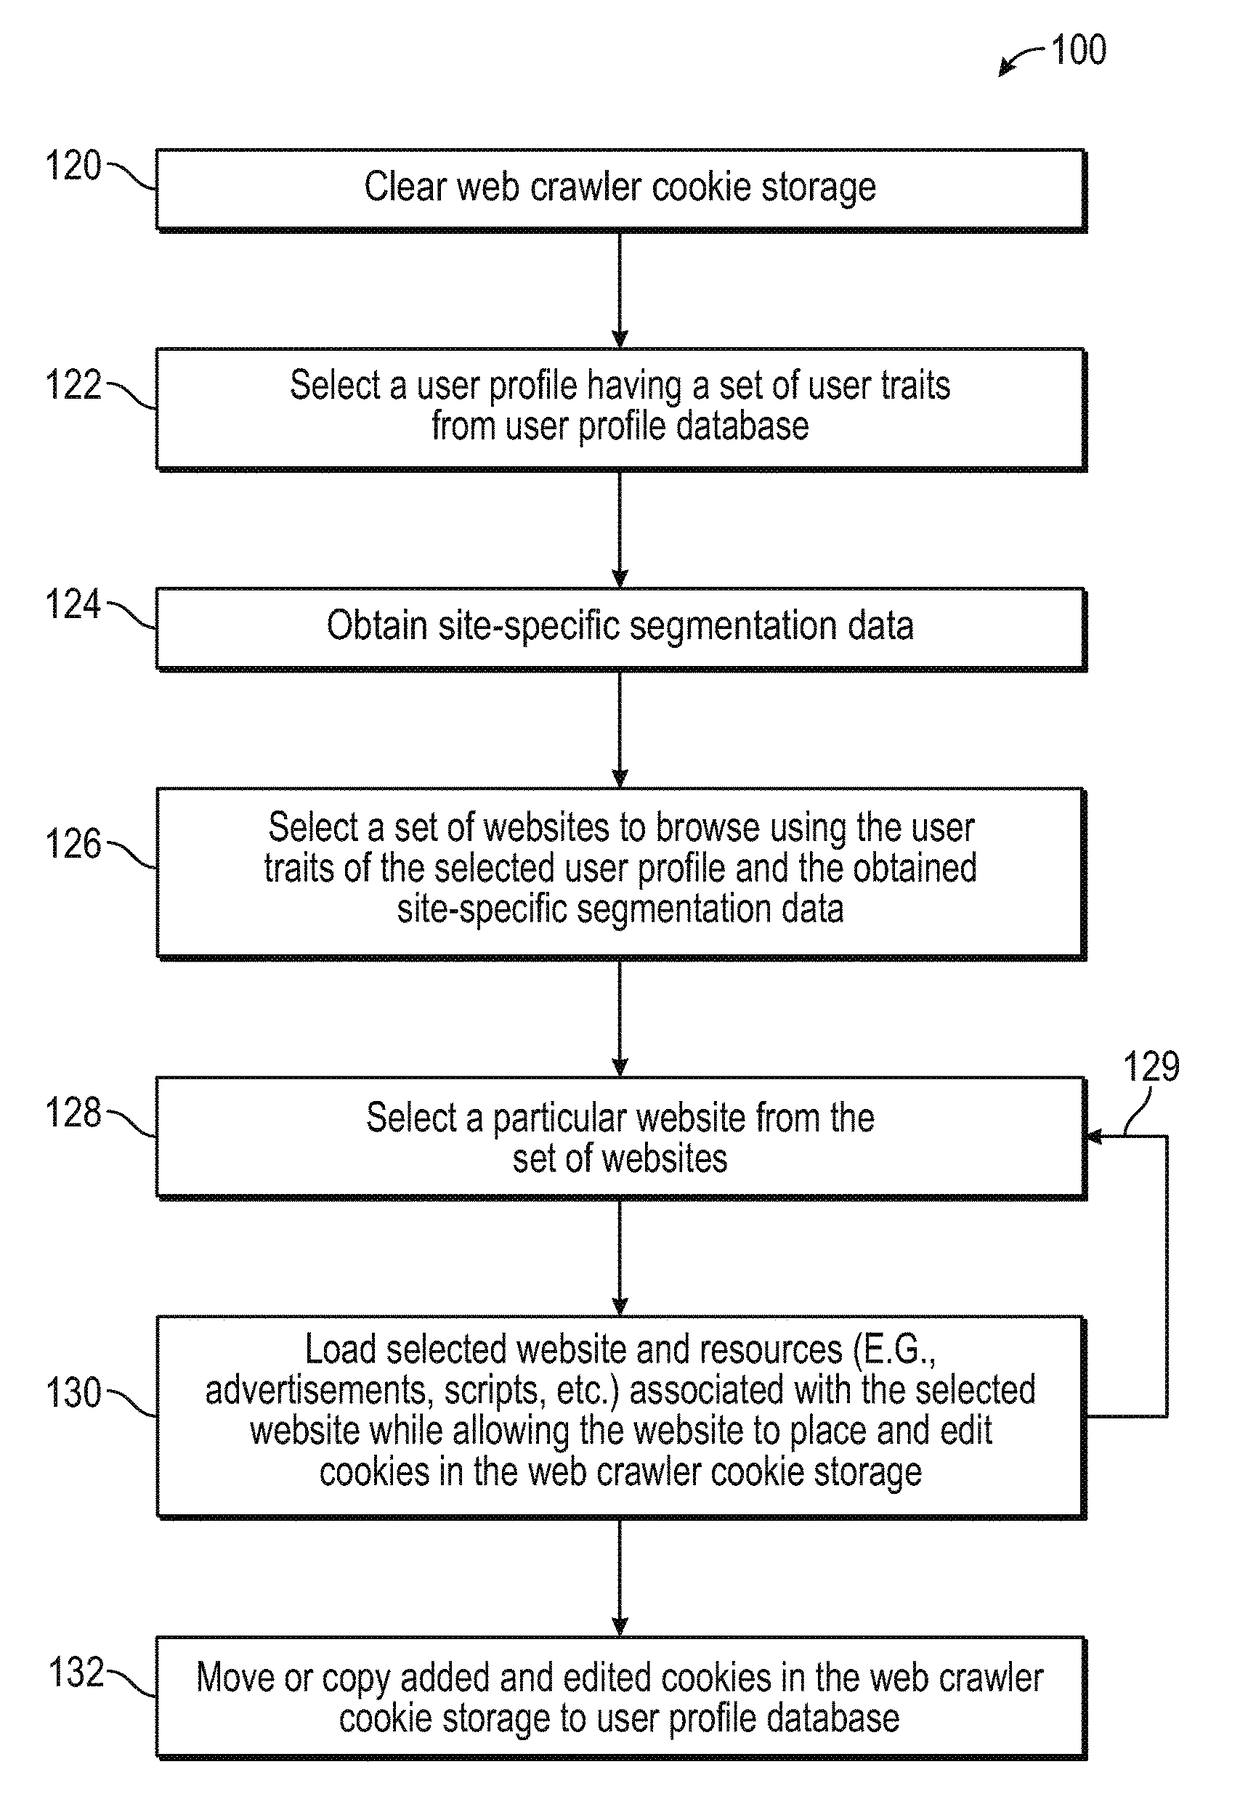 Systems and methods for generating and maintaining internet user profile data